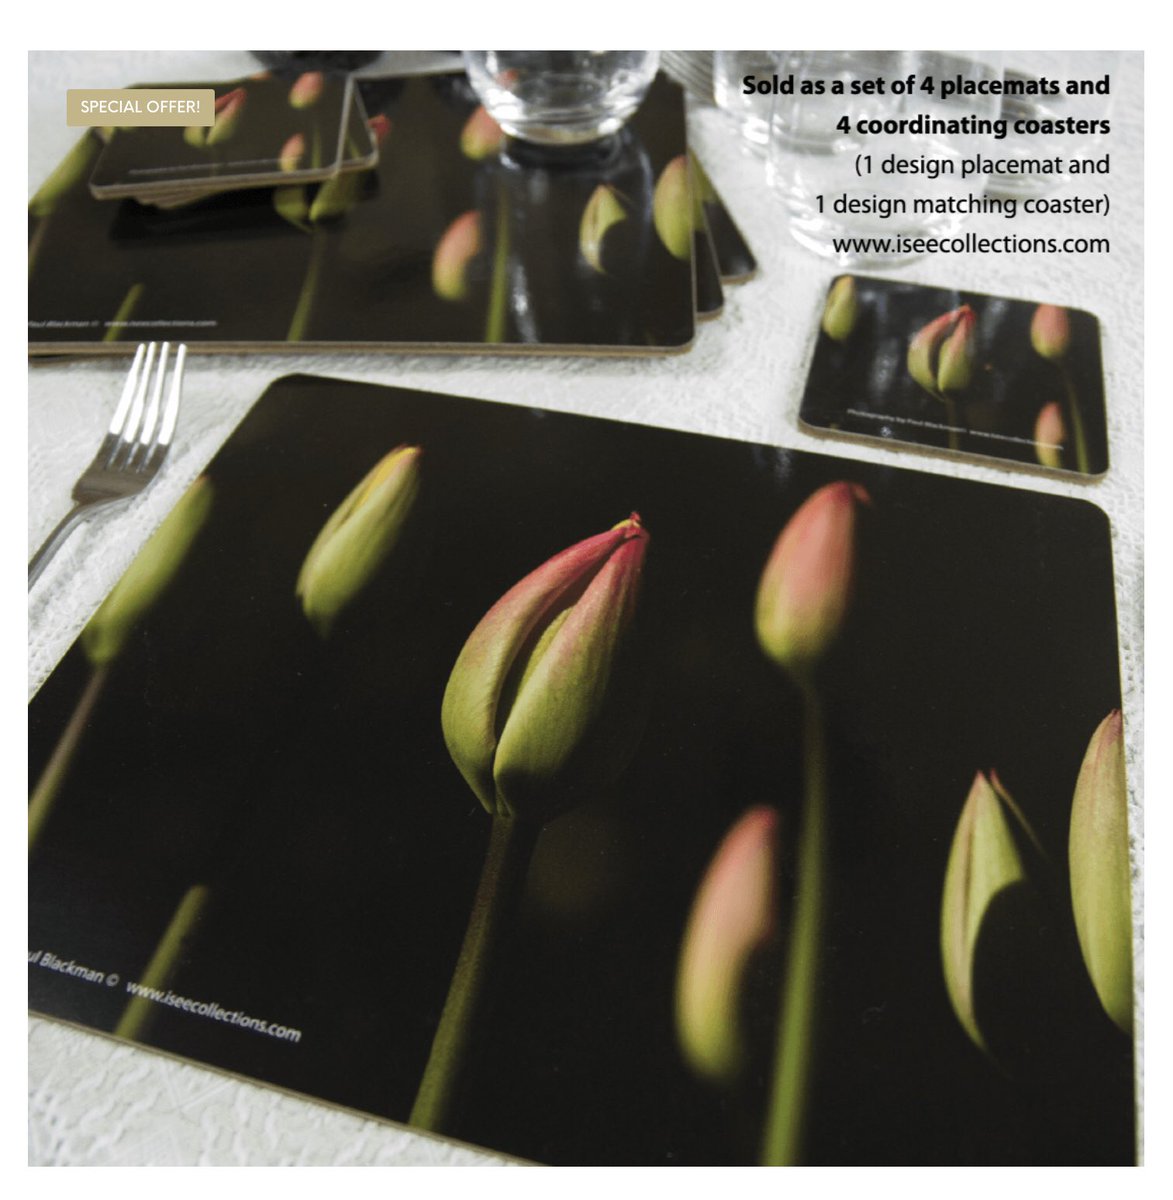 Good morning #Spring is here at last so we’re celebrating with our #tulips placemats sets Our own photography taken 1st thing in the morning as they popped up out of the ground, not retouched, just perfect 🌷❤️ Browse and buy here: iseecollections.com/shop/?special-… #shopindie #EarlyBiz